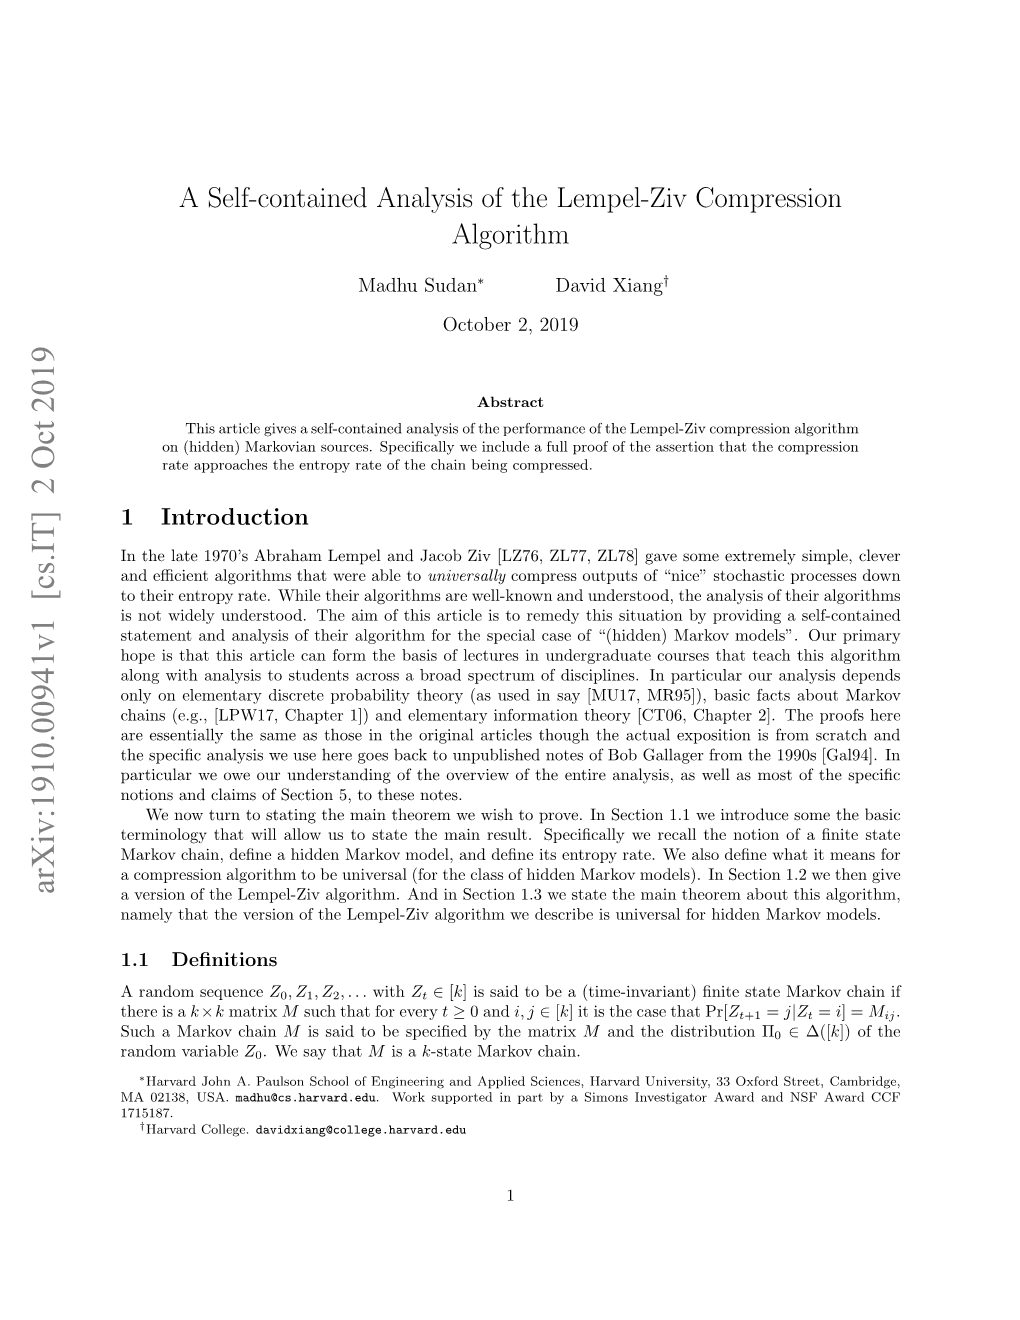 A Self-Contained Analysis of the Lempel-Ziv Compression Algorithm